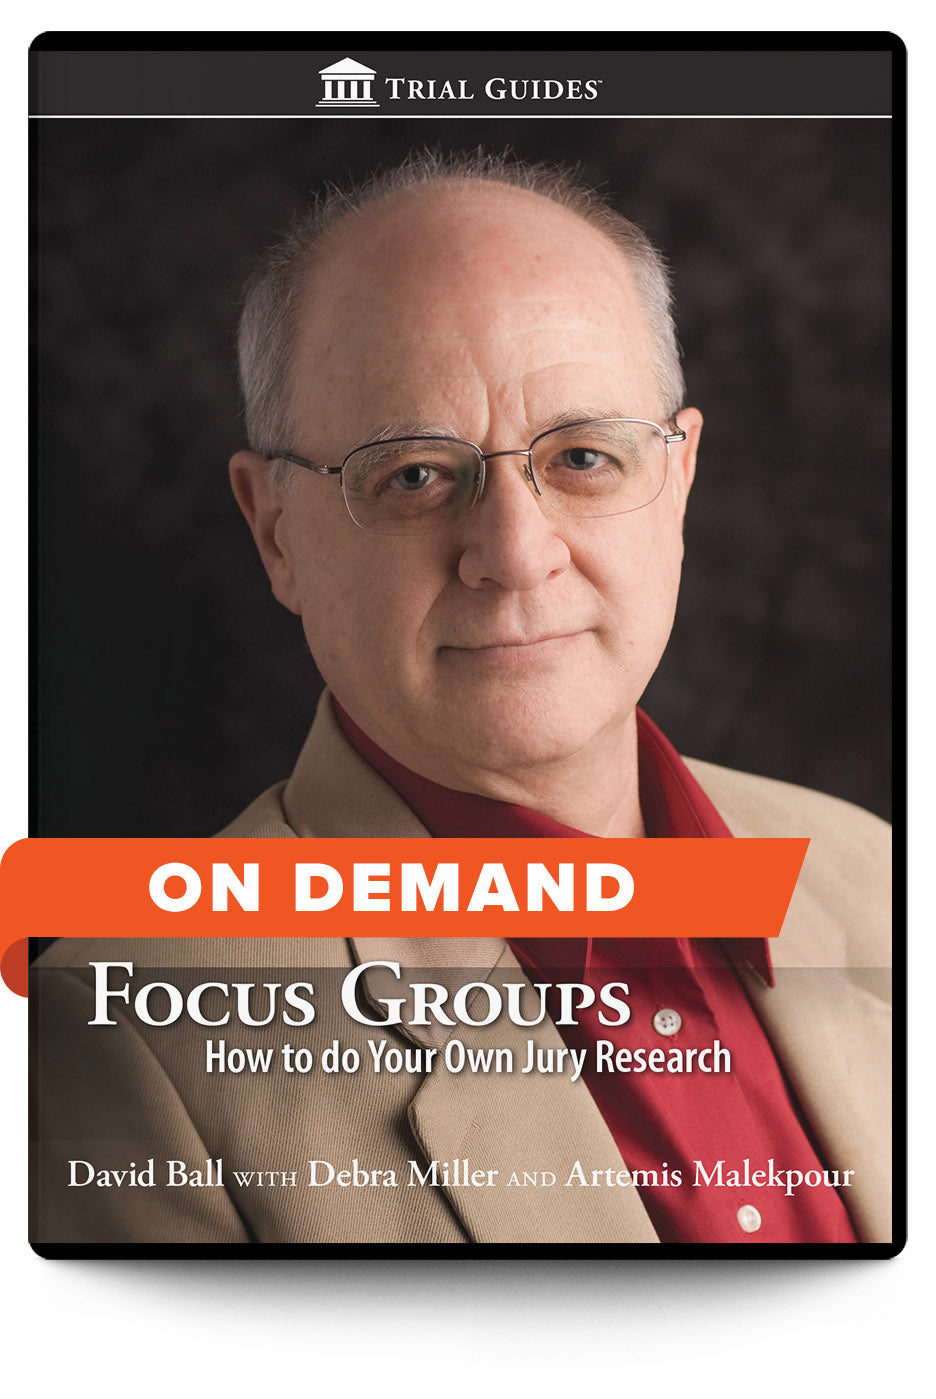 Focus Groups: How to Do Your Own Jury Research - On Demand